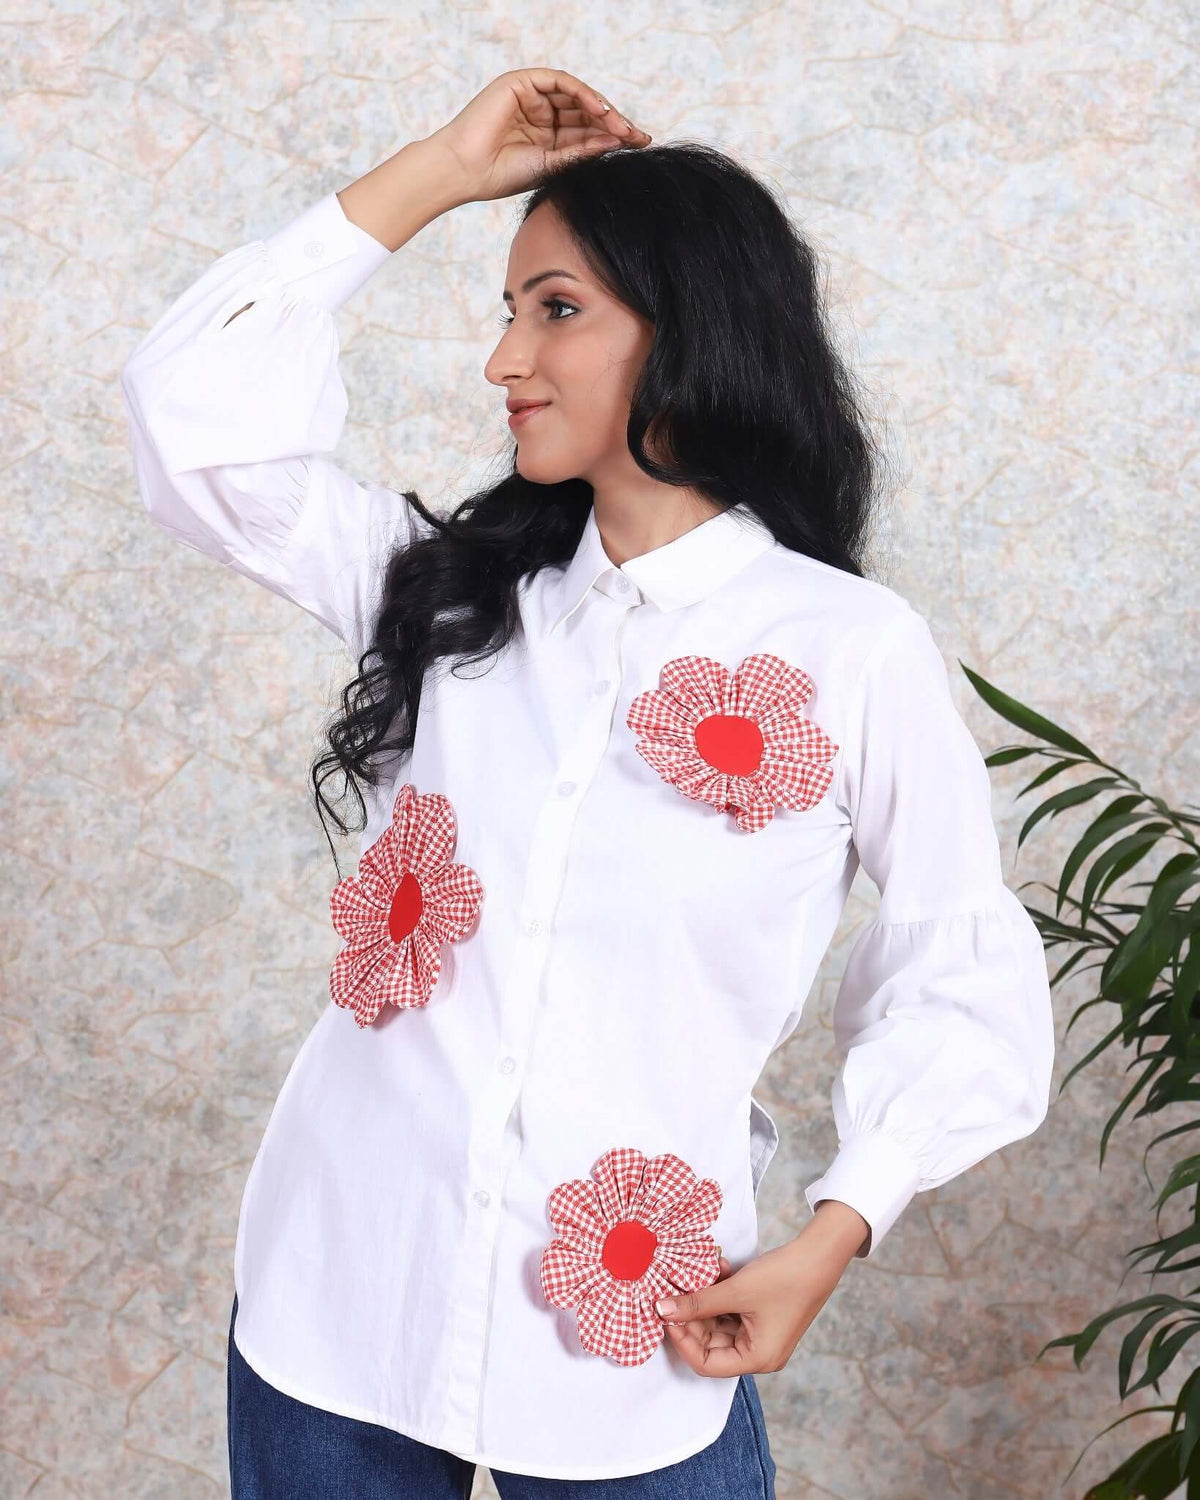 Woman modeling trendy white cotton shirt with red floral appliqués from House Of Majisha, perfect for casual summer fashion.